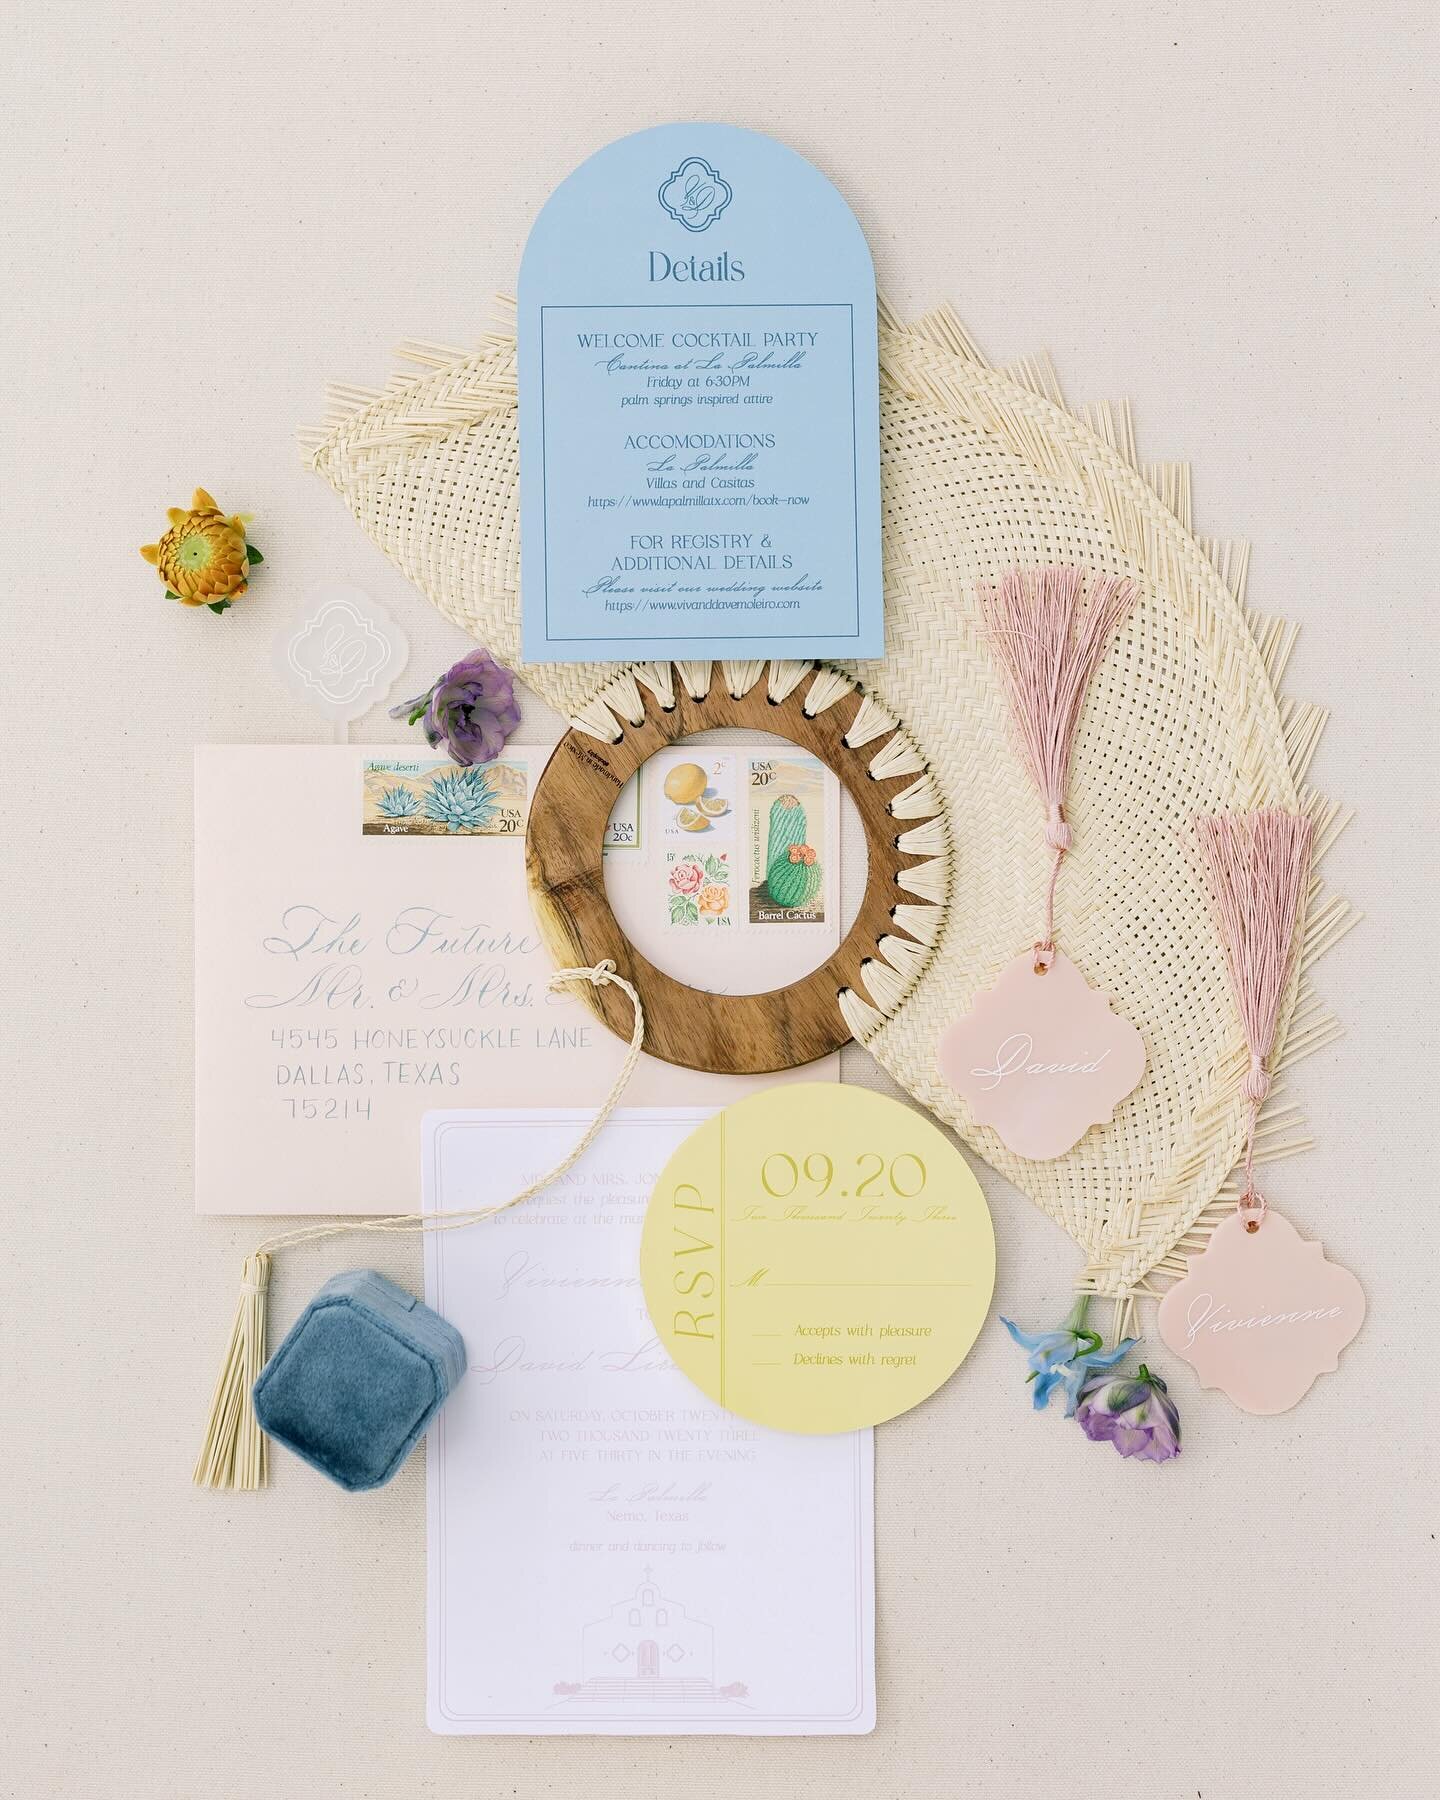 We love mixing shapes and colors for added detail. The full suite from the styled shoot @lapalmillatx taken by the insanely talented @mochiesnyder alongside an incredible group of vendors

Paper Goods &amp; Acrylic : @leycolettering 
Photography : @m